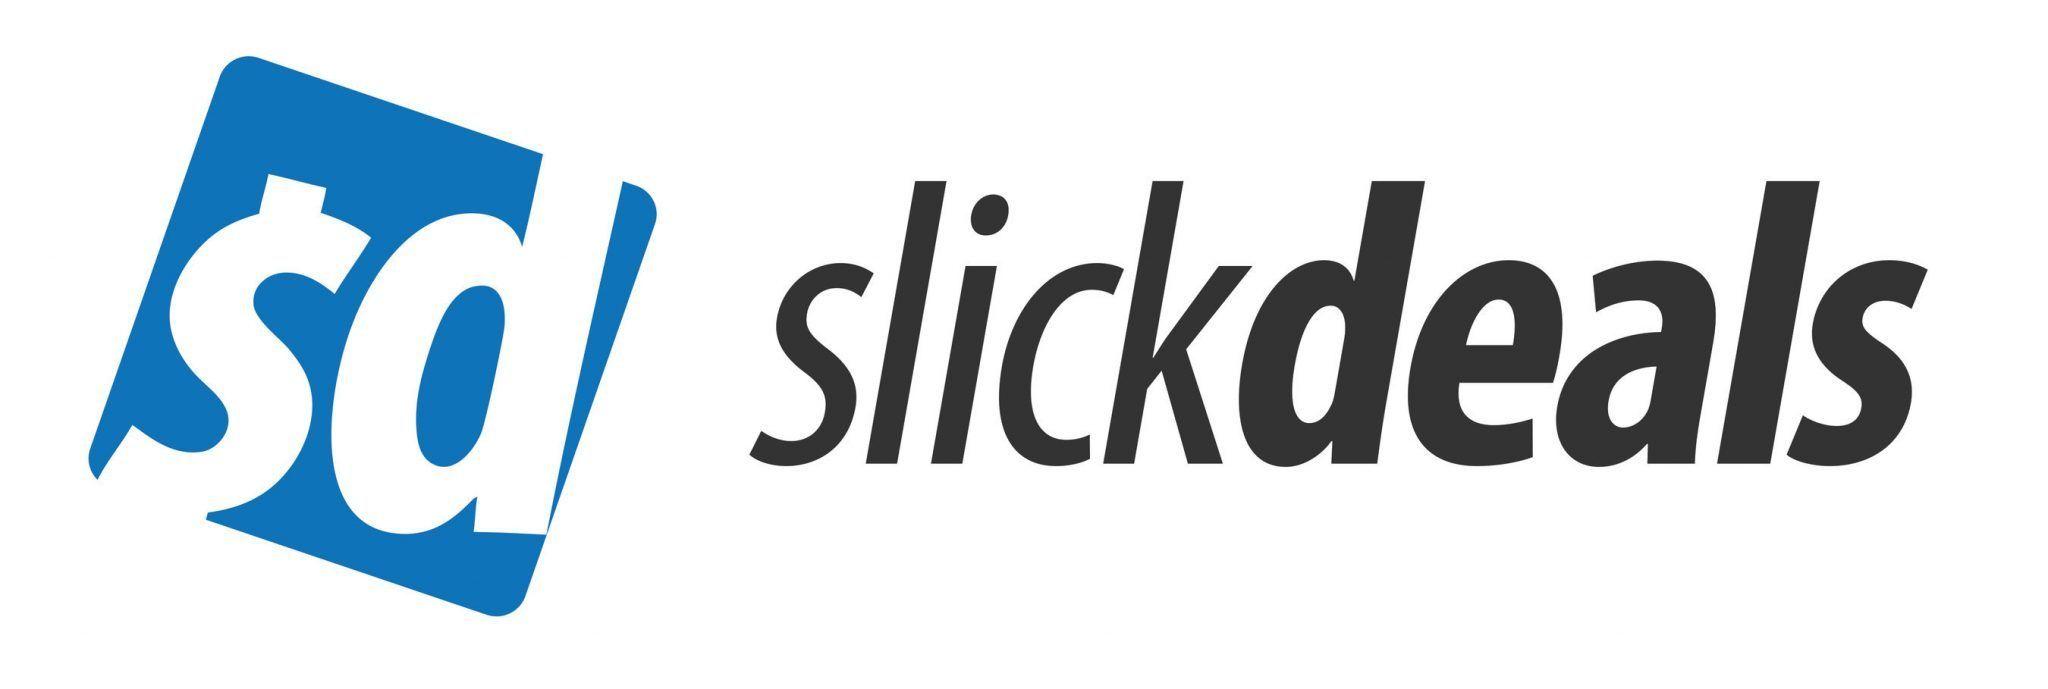 Slickdeals Logo - Andy's Favorite Things | Slickdeals - Andy's Favorite Things